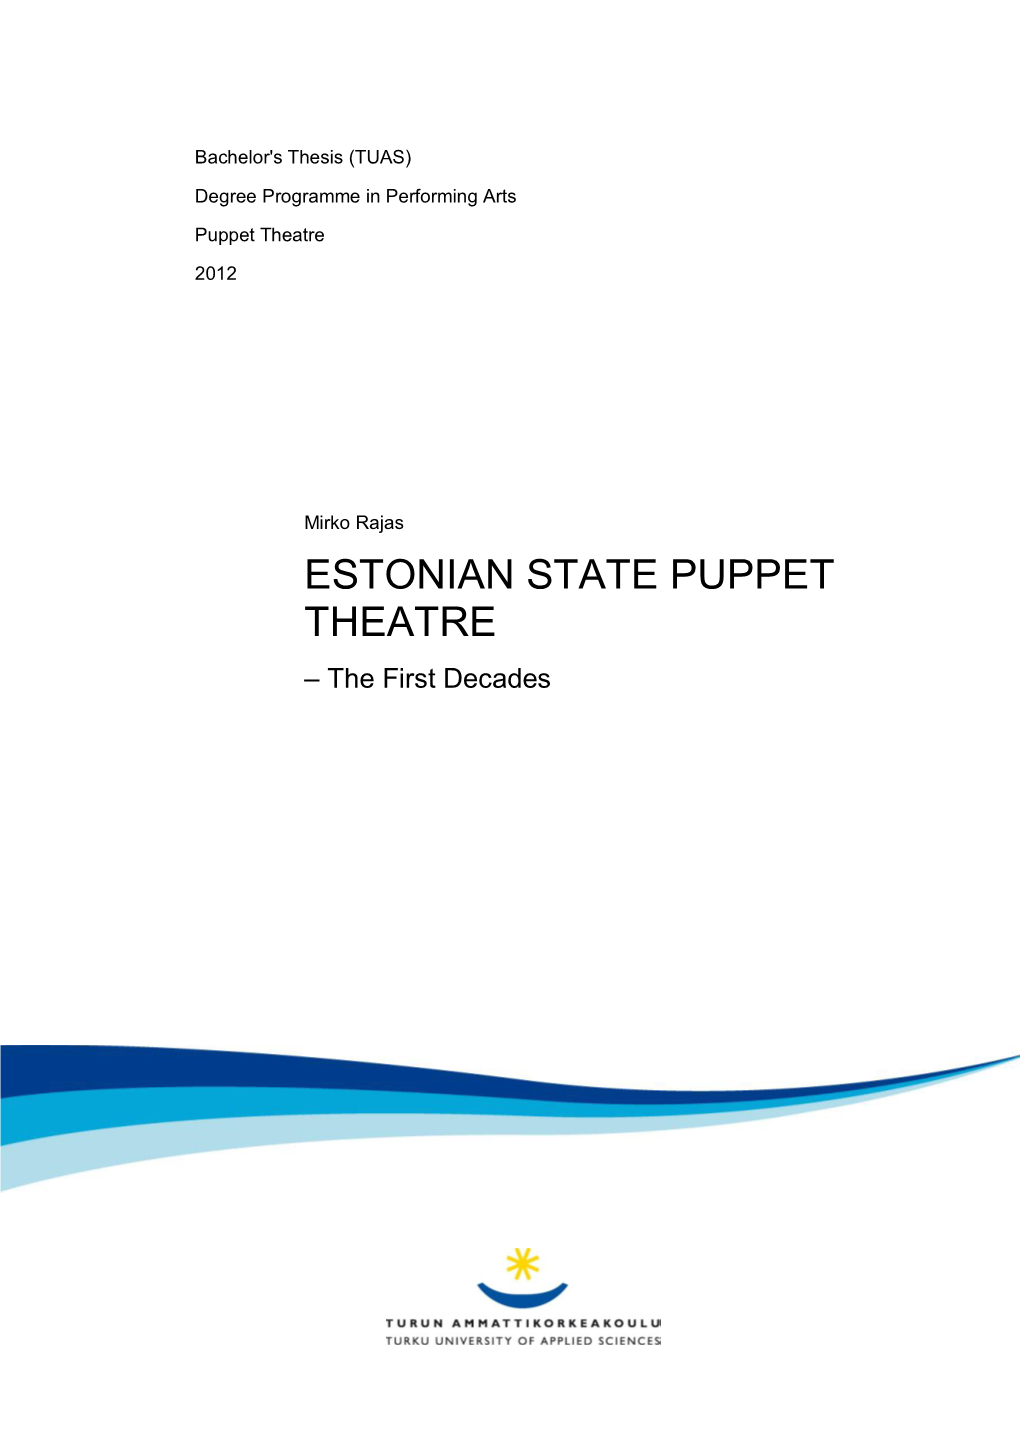 ESTONIAN STATE PUPPET THEATRE ± the First Decades